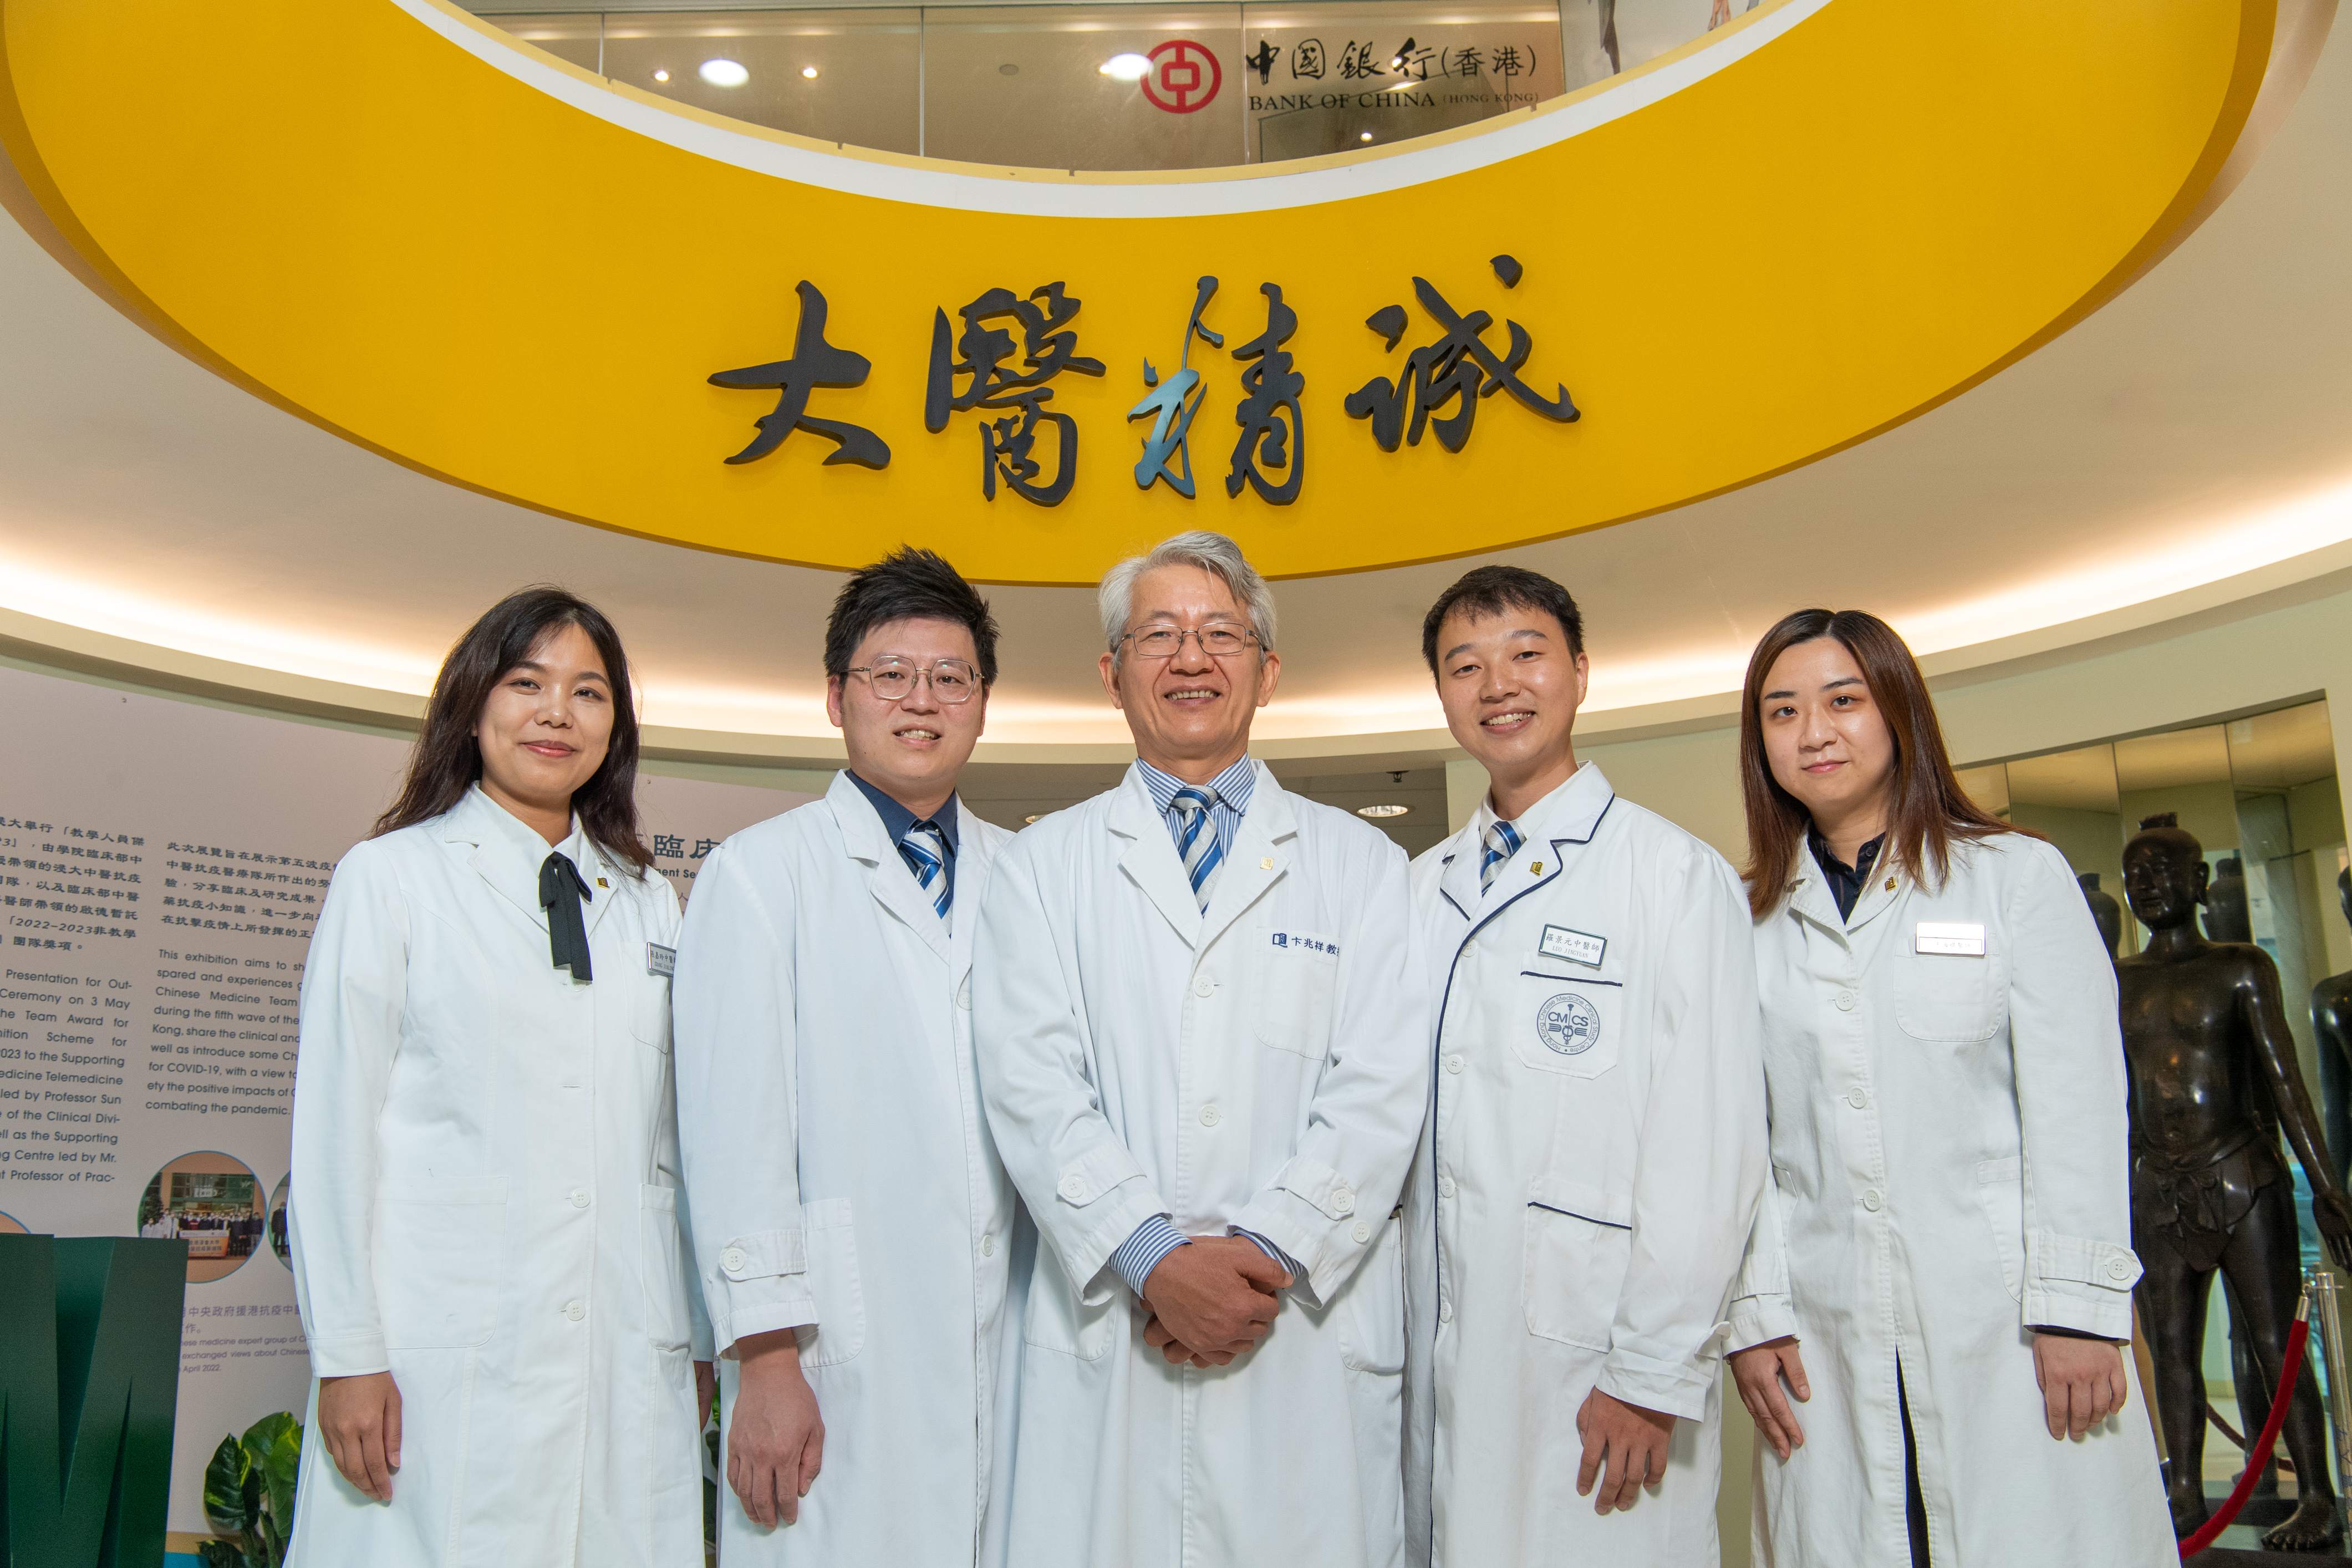 Professor Bian Zhaoxiang, Director of the Clinical Division at HKBU’s School of Chinese Medicine (middle), together with his research team members Mr Cheung Chun-hoi, Associate Director of the Clinical Division (2nd left); Dr Zhang Jialing, Postdoctoral Fellow of the Centre for Chinese Herbal Medicine Drug Development (1st left); Mr Luo Jingyuan and Wong Hoi-ki, PhD students (2nd and 1st right) of SCM at HKBU, analyse patient statistics to deepen the medical community’s understanding of the symptoms during the early and middle stages of COVID-19 infection as well as the post-COVID syndrome.